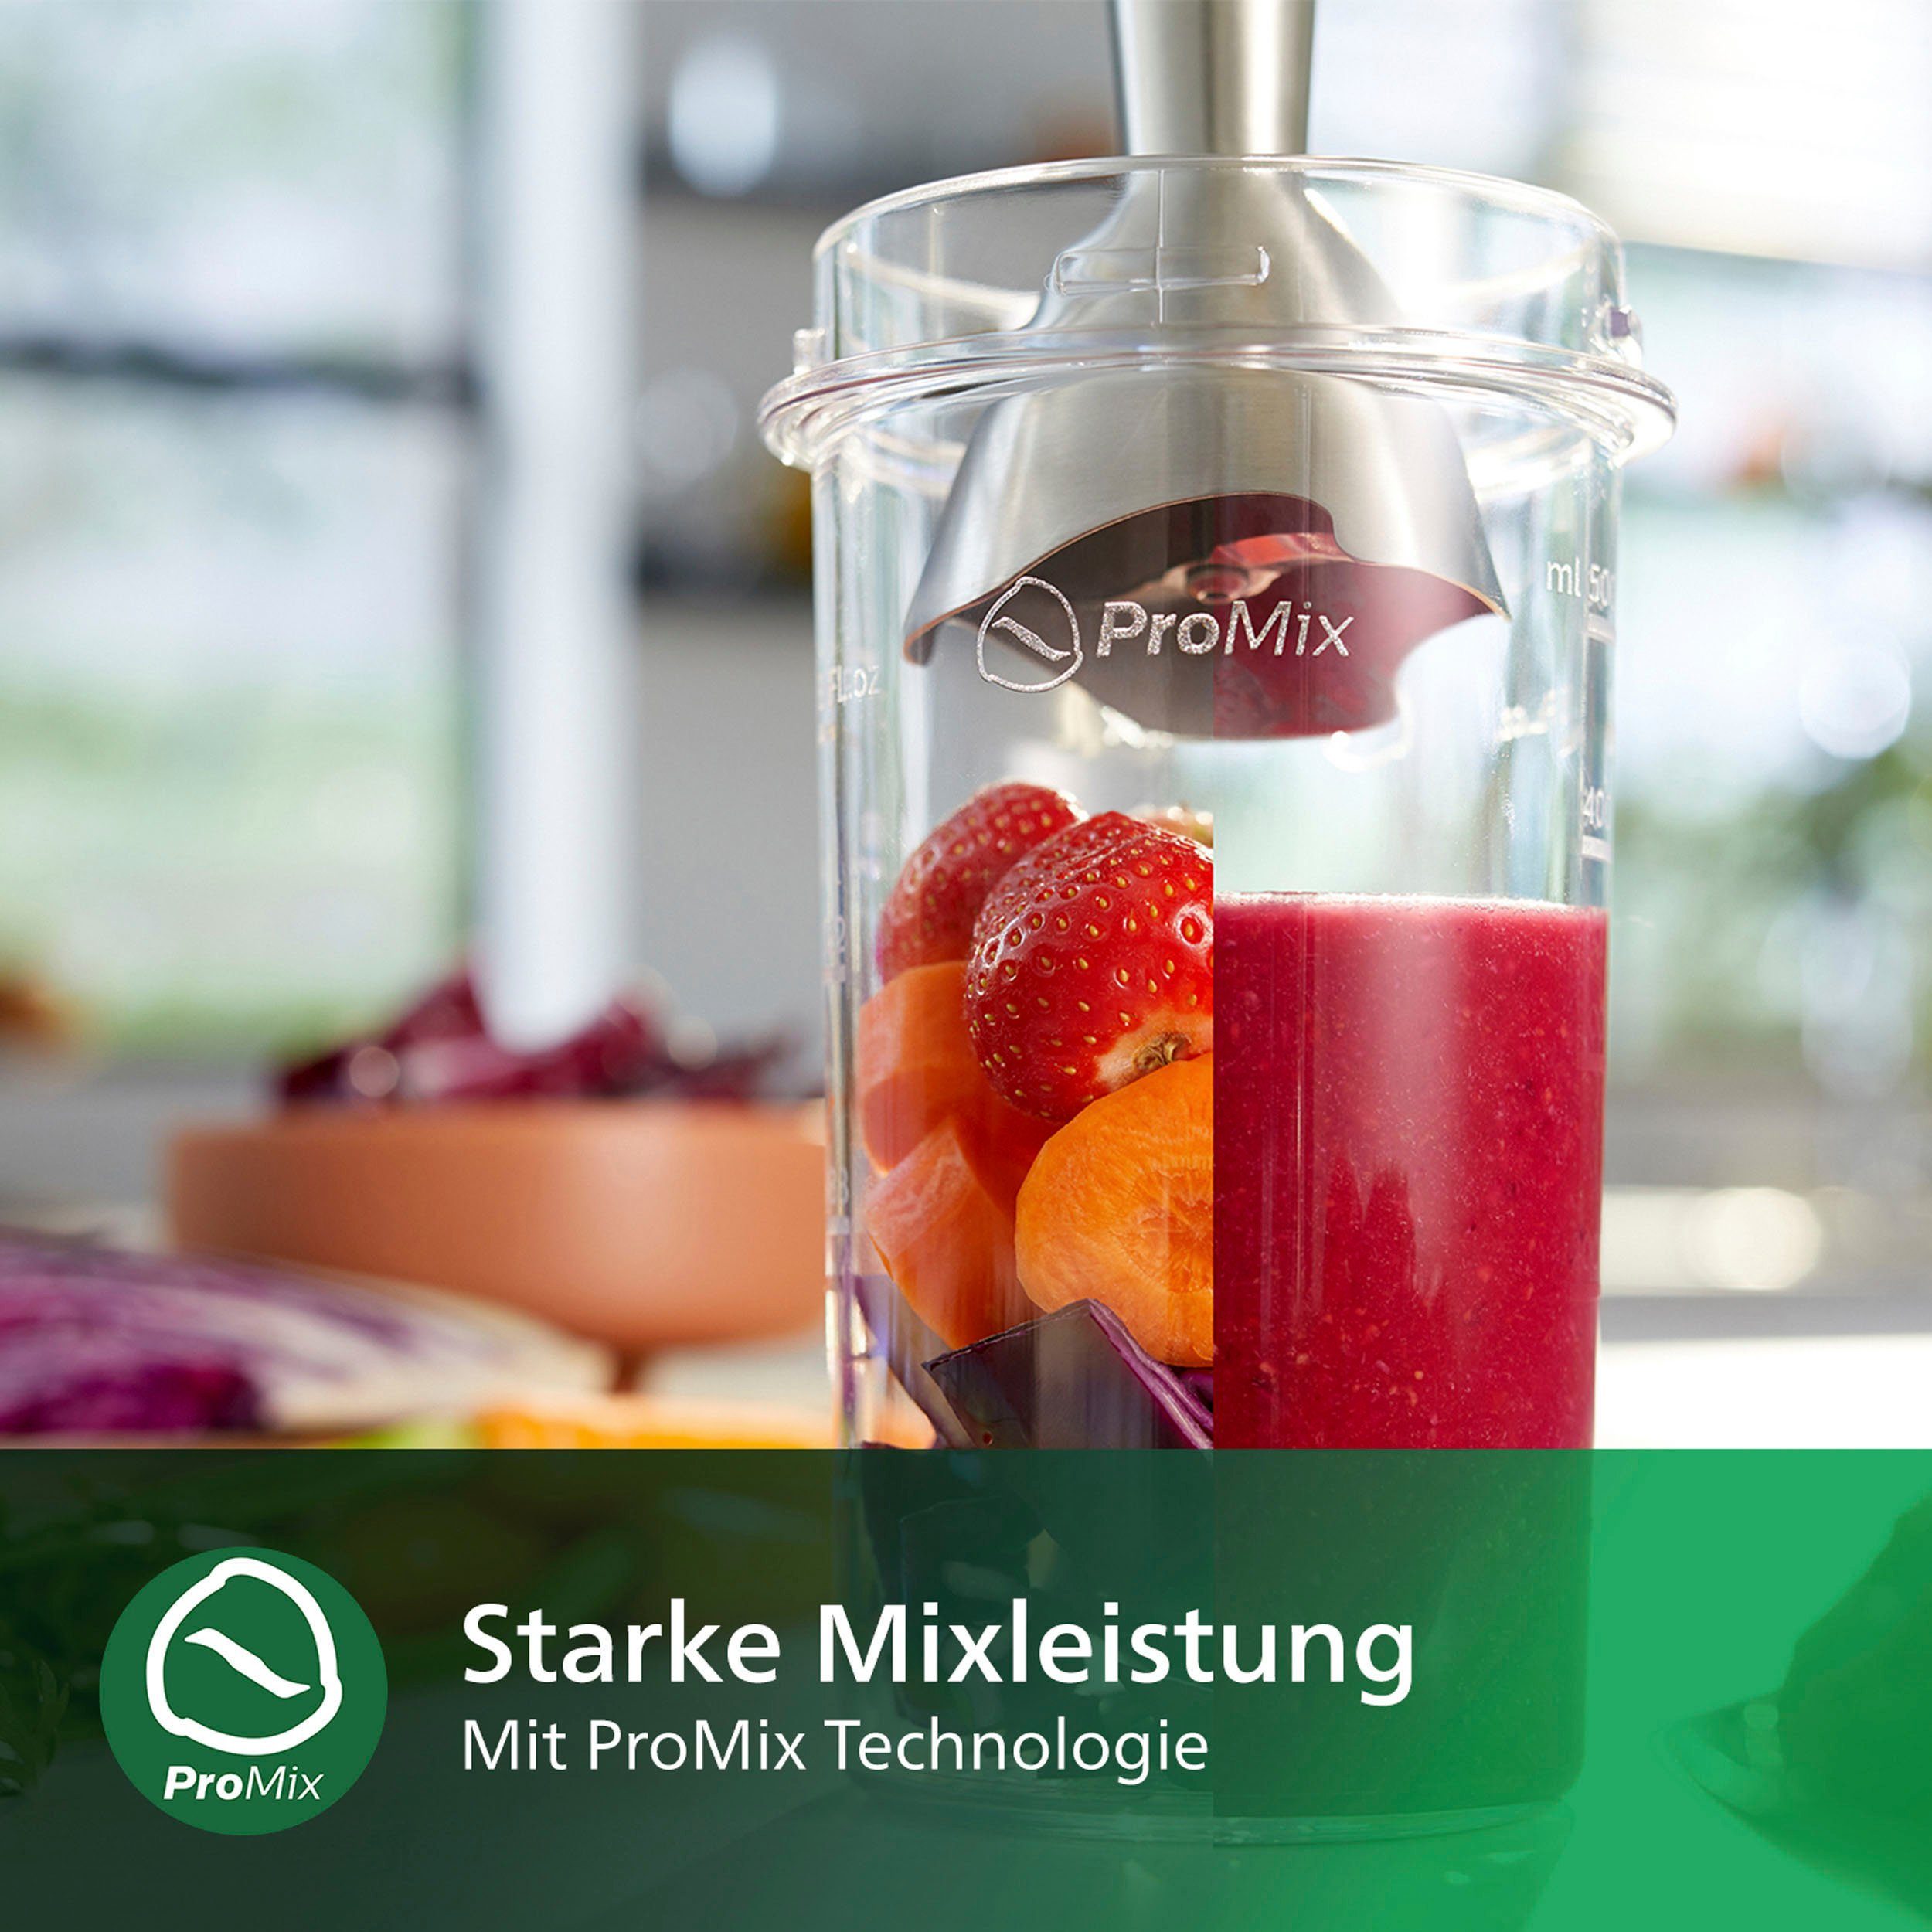 Daily 650 ProMix Stabmixer Mixstab Collection HR2534, W, Metall Philips